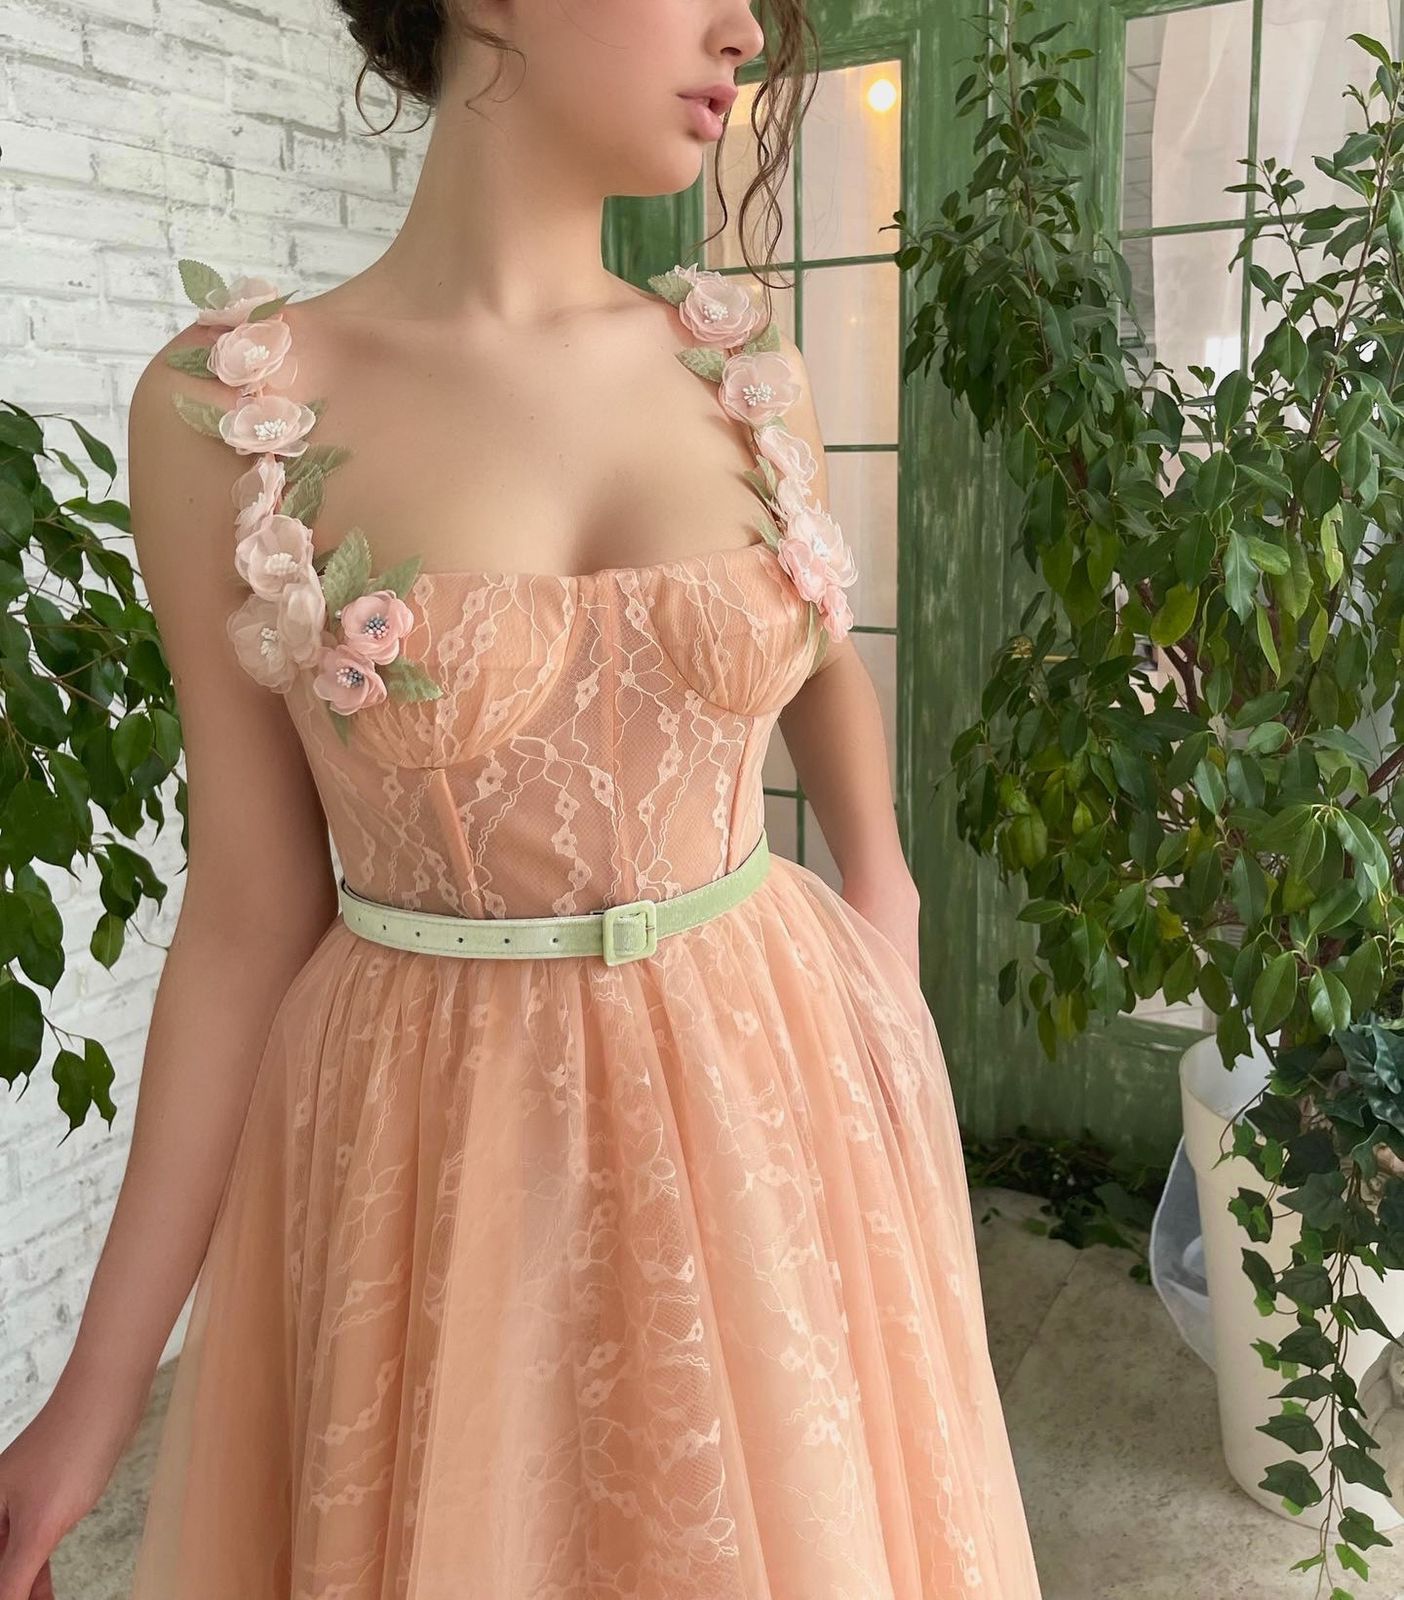 Peach midi dress with spaghetti straps, embroidery, flowers and belt